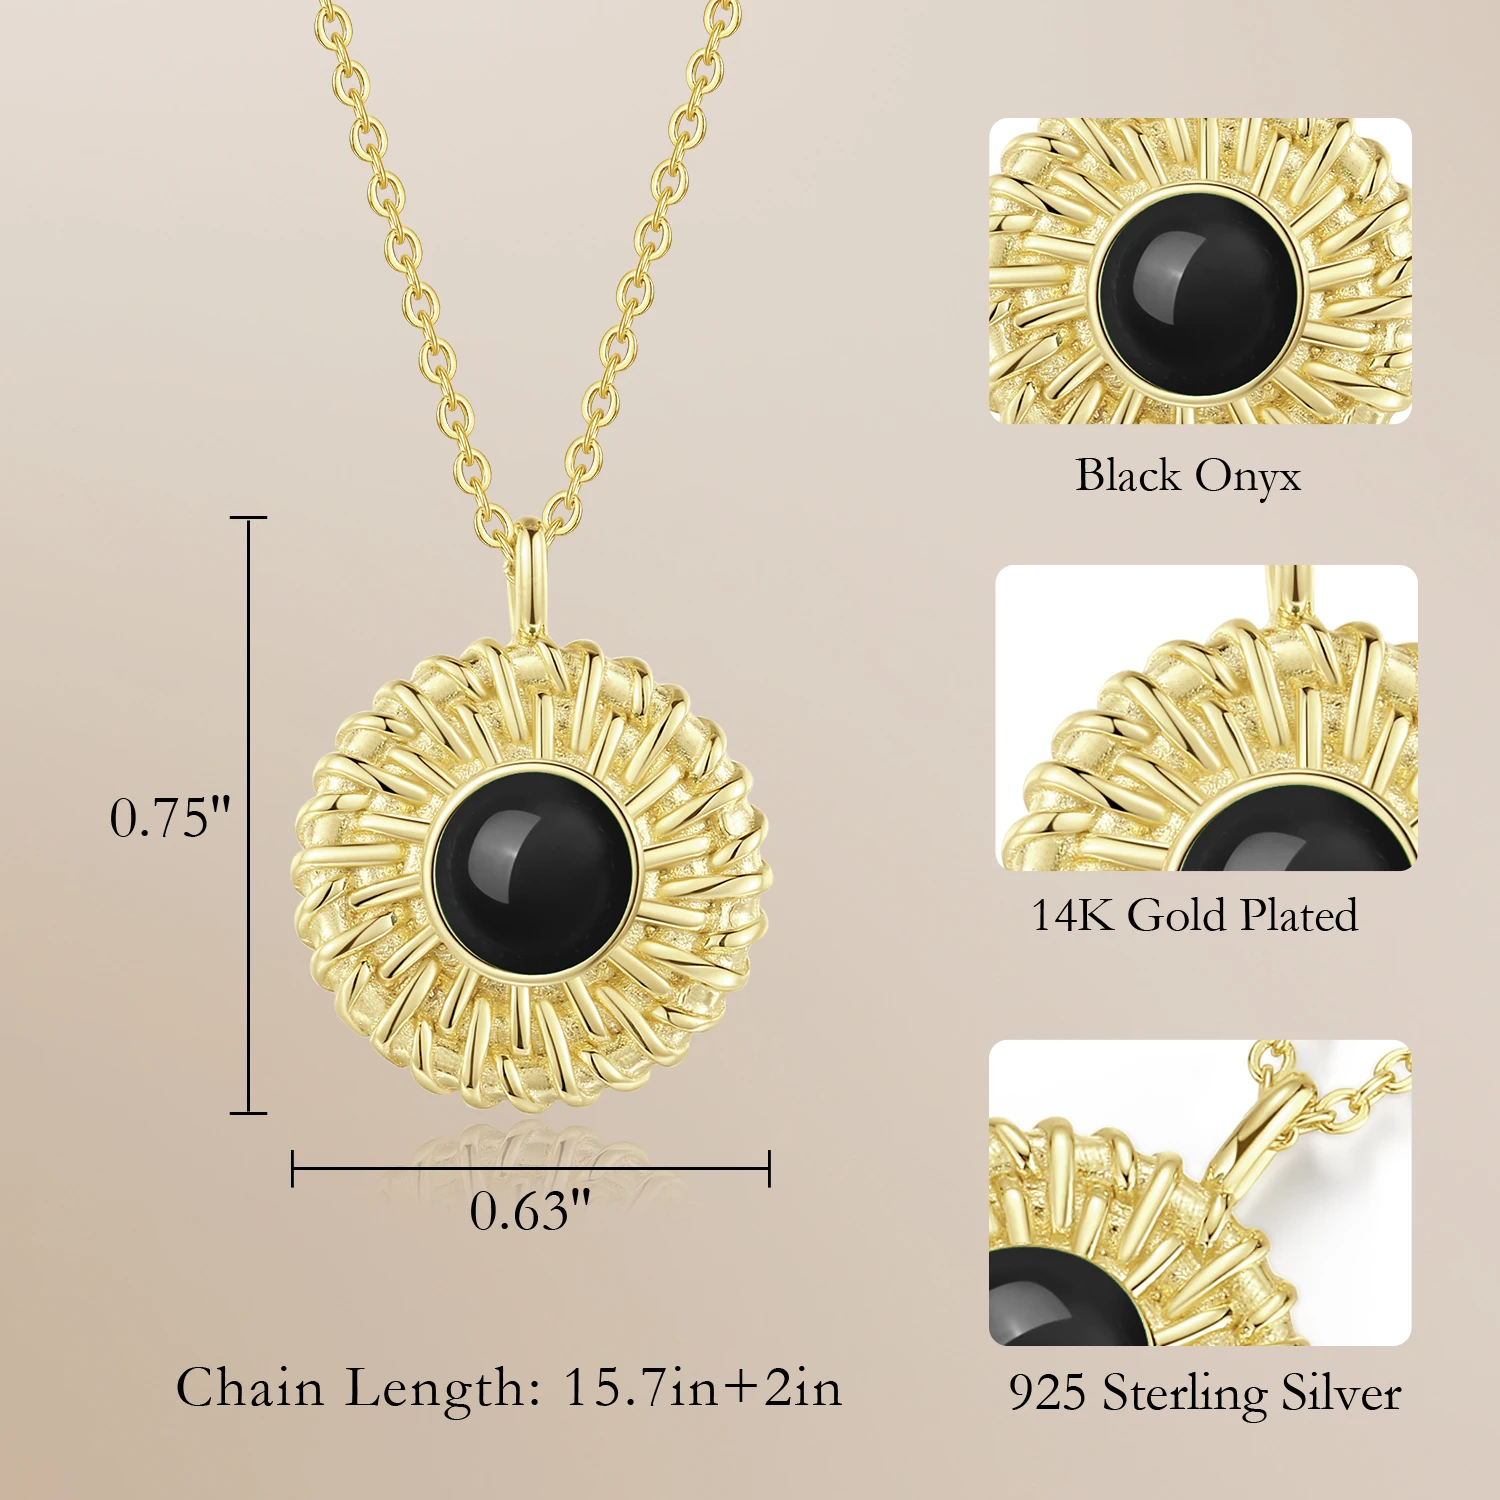 CDE YN1224 Fine 925 Sterling Silver Jewelry Wholesale Black Onyx Pendant With 14K Gold Plated Chain Women Pendant Necklace